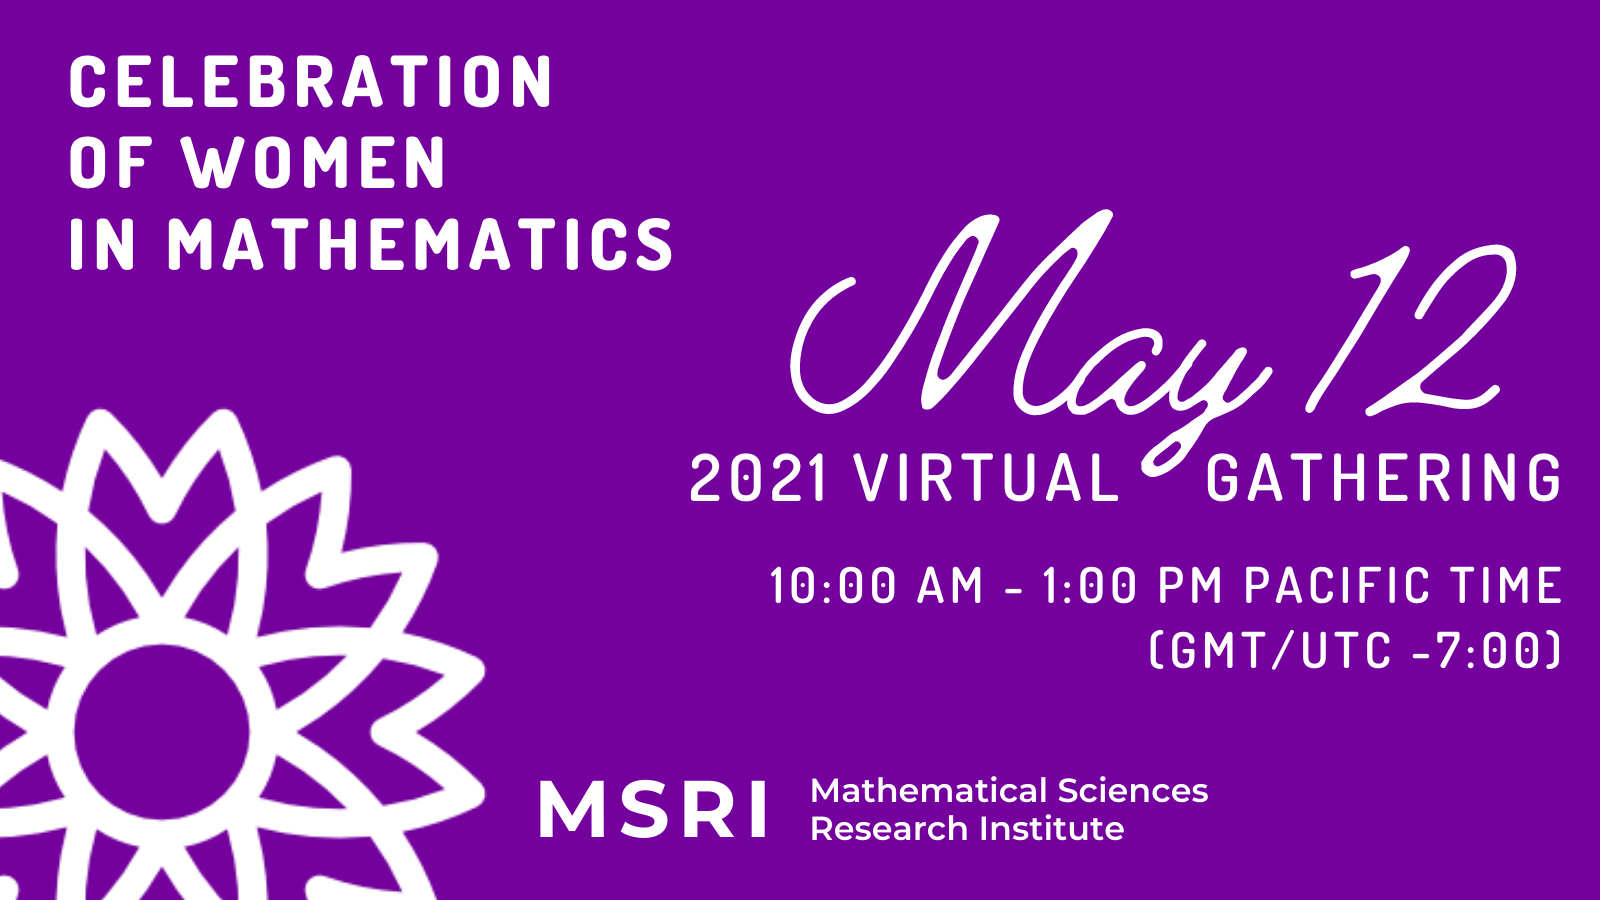 MSRI May 12 event promotional image